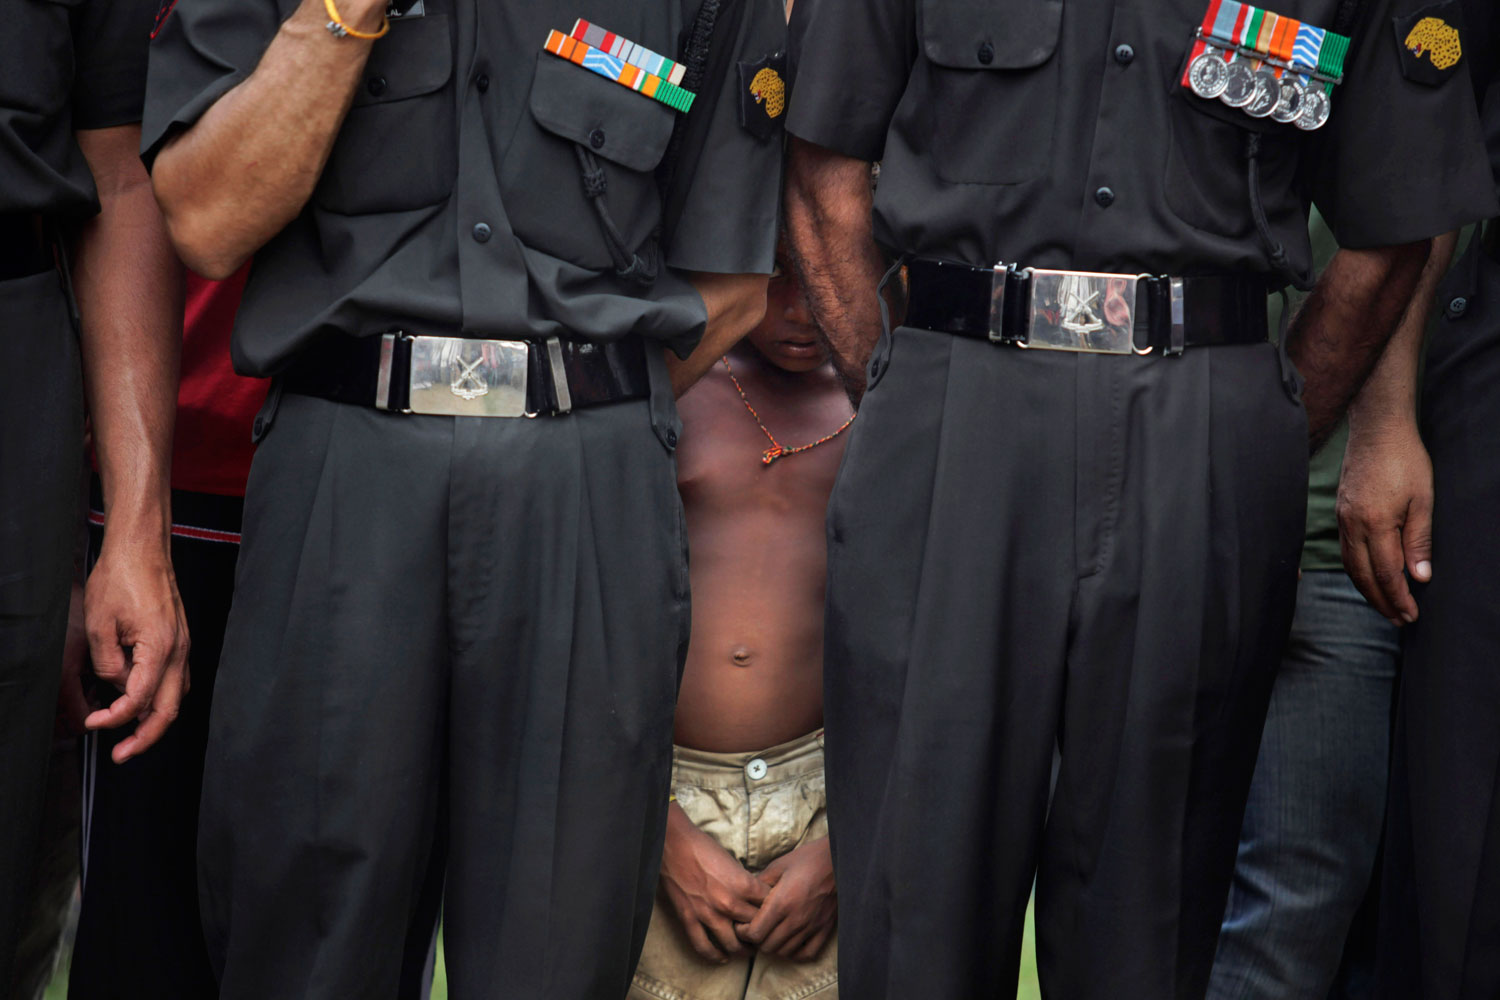 August 22, 2011. A young Indian boy peeps from behind Indian soldiers as they watch the cremation of slain Indian army officer Lt. Navdeep Singh in Gurdaspur, India. Singh was killed, Aug. 20, when Indian troops in Kashmir fought a deadly gunbattle with suspected rebels crossing the military Line of Control from Pakistani-controlled territory.